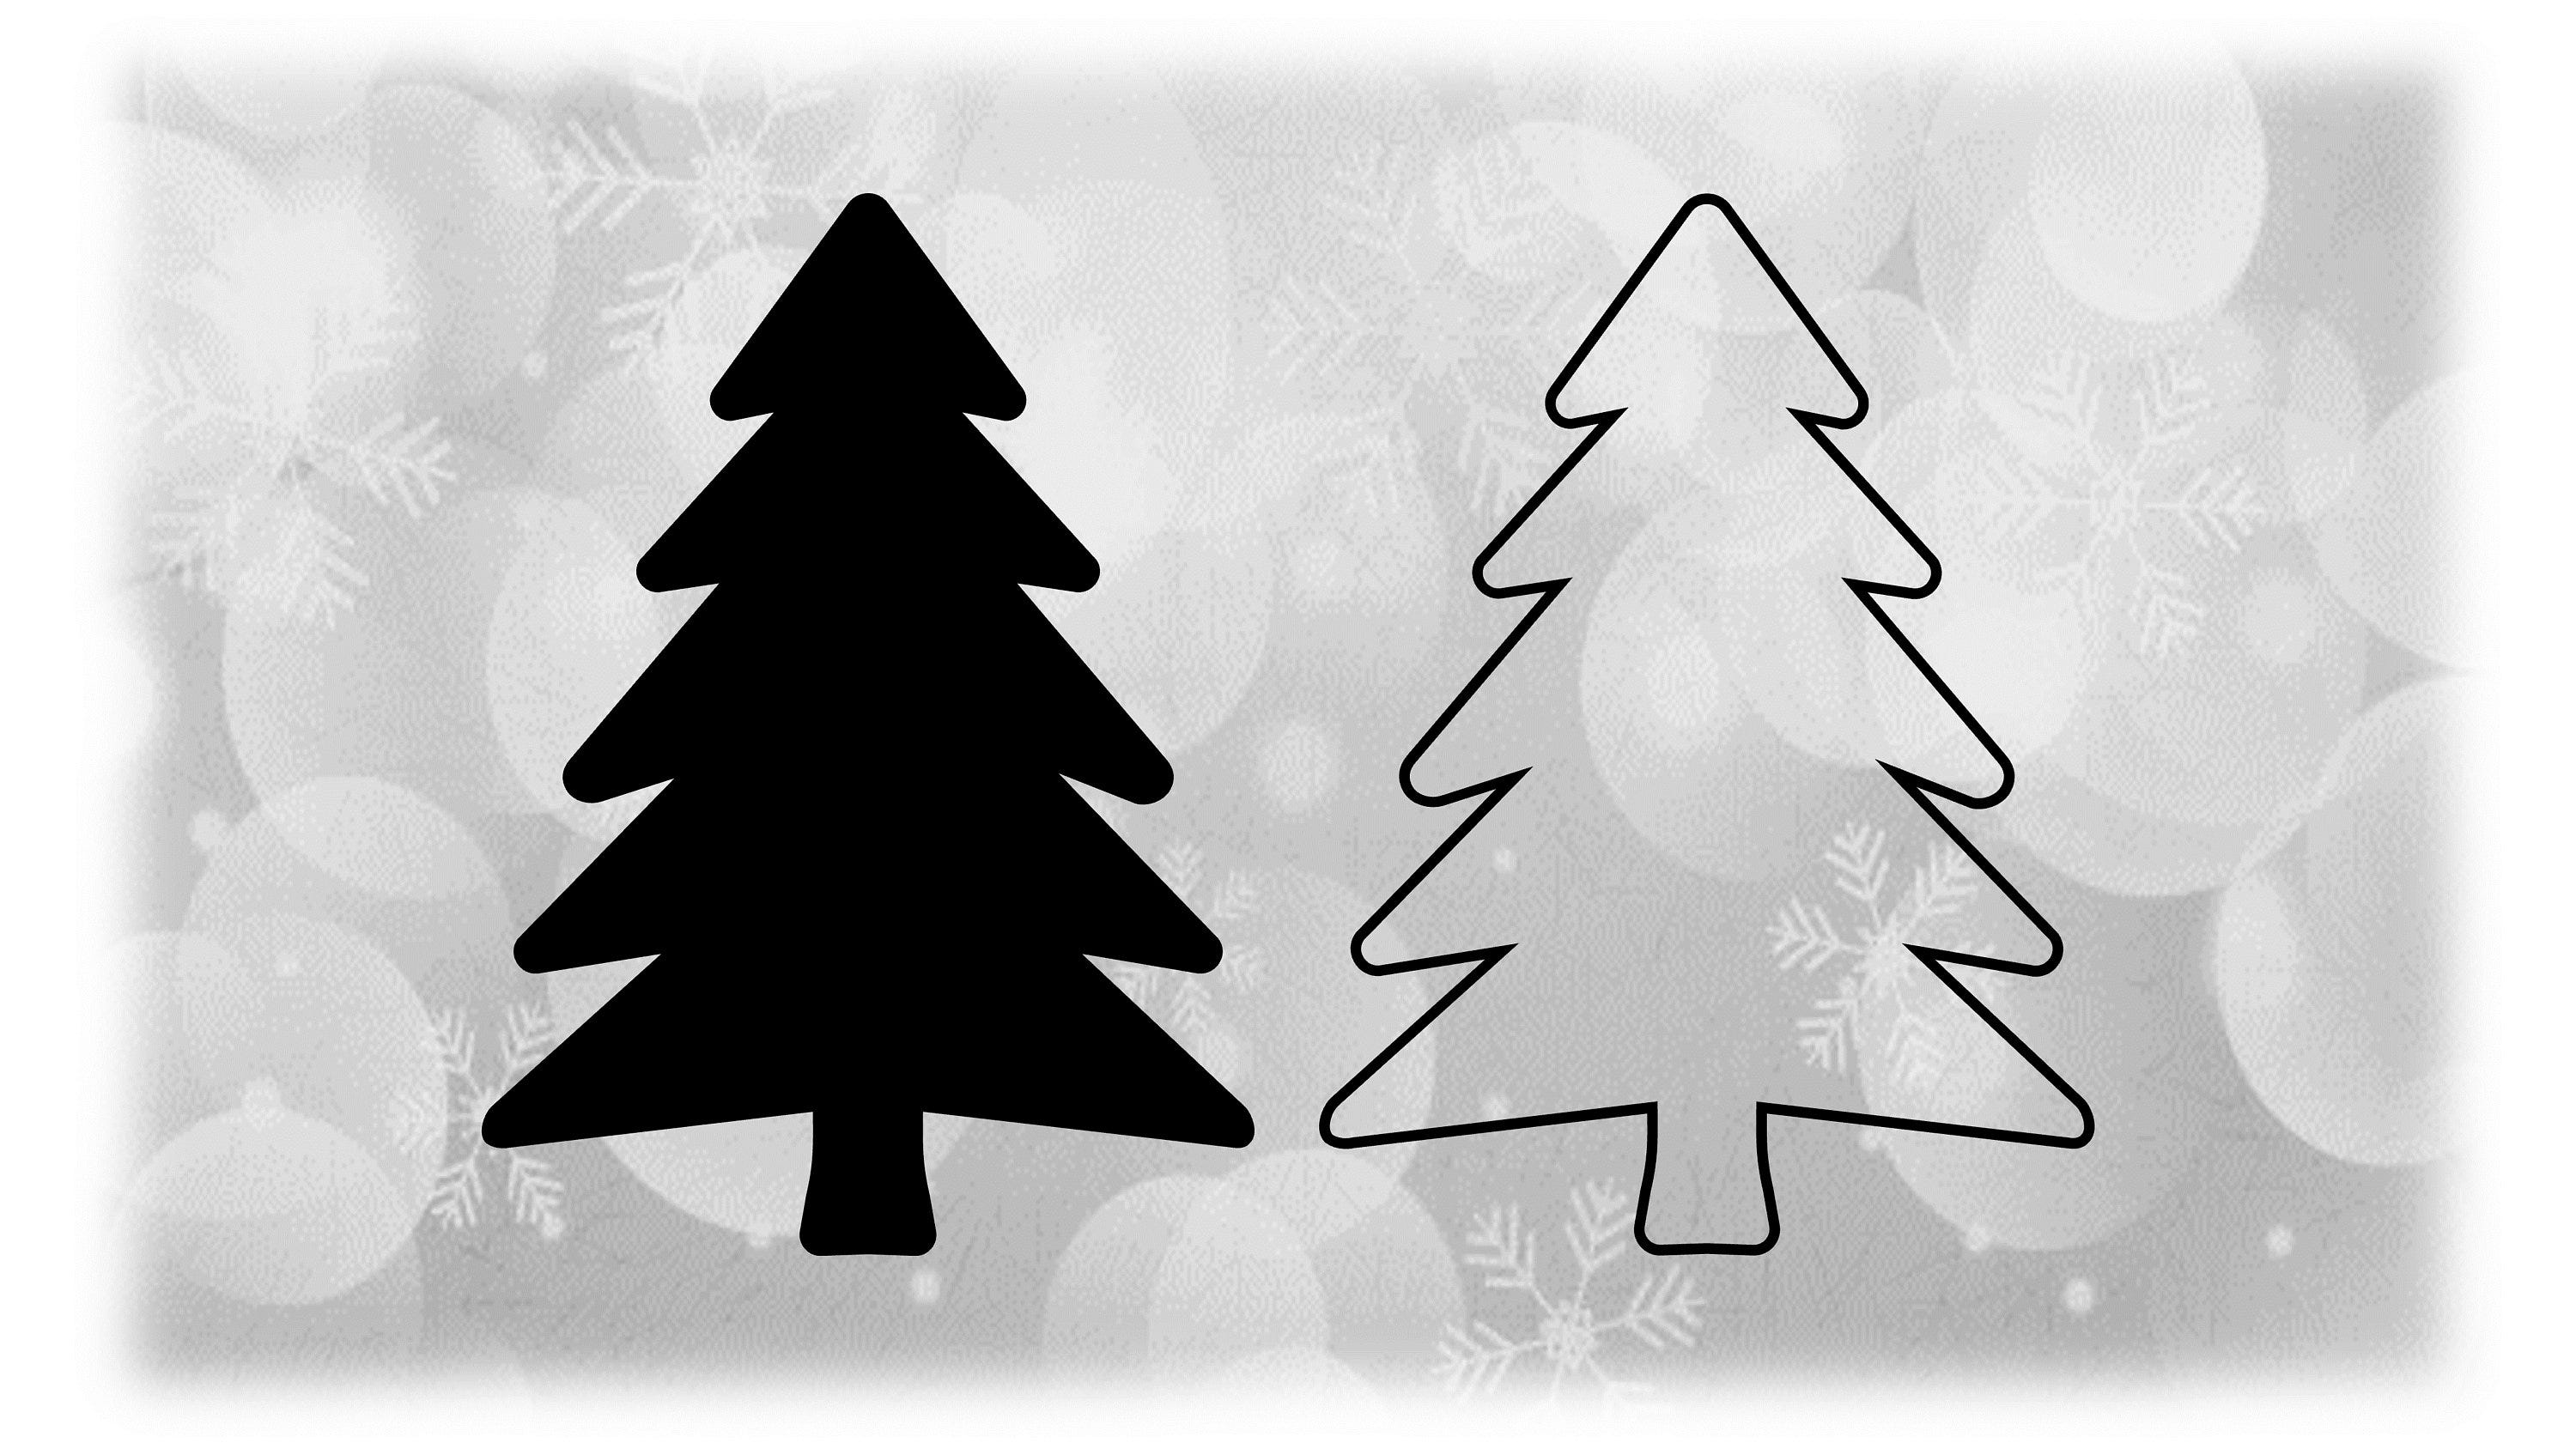 Holiday Clipart: Black Solid and Outline Simple Evergreen / Pine Tree for Winter, Christmas, Yule Celebration - Digital Download SVG & PNG